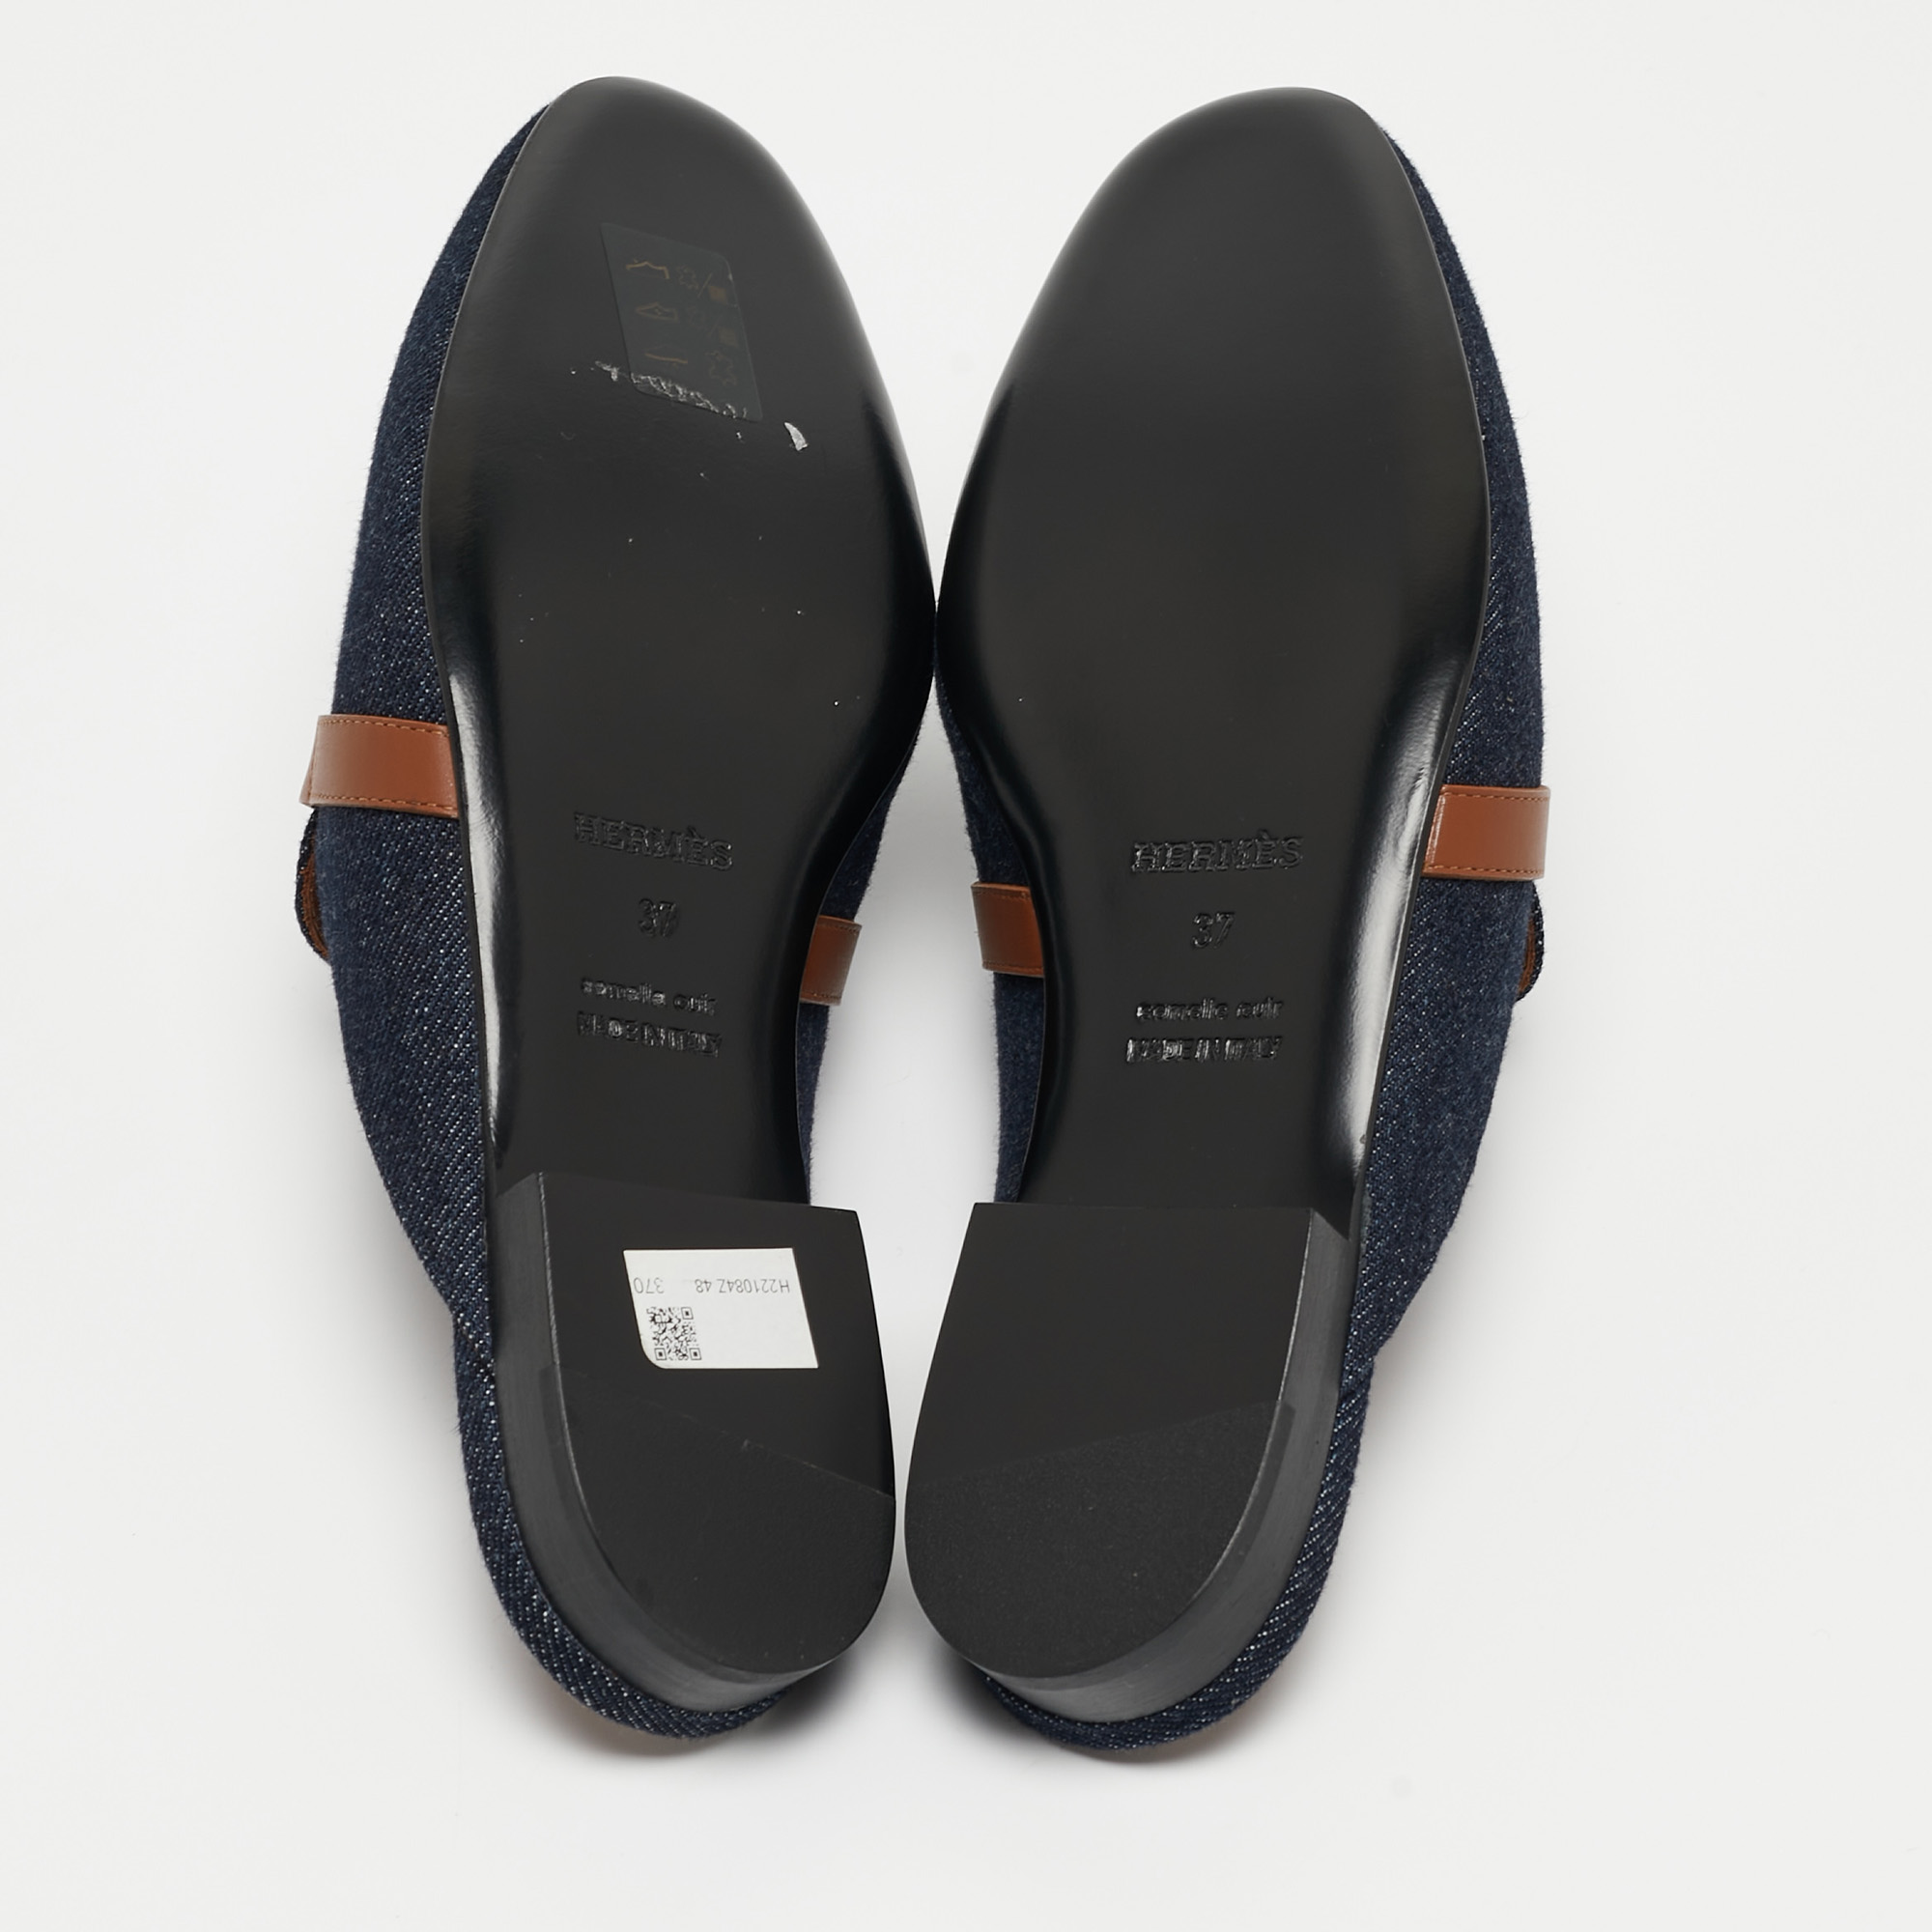 Hermes Navy Blue/Tan Denim And Leather Oz Flat Mules Size 37